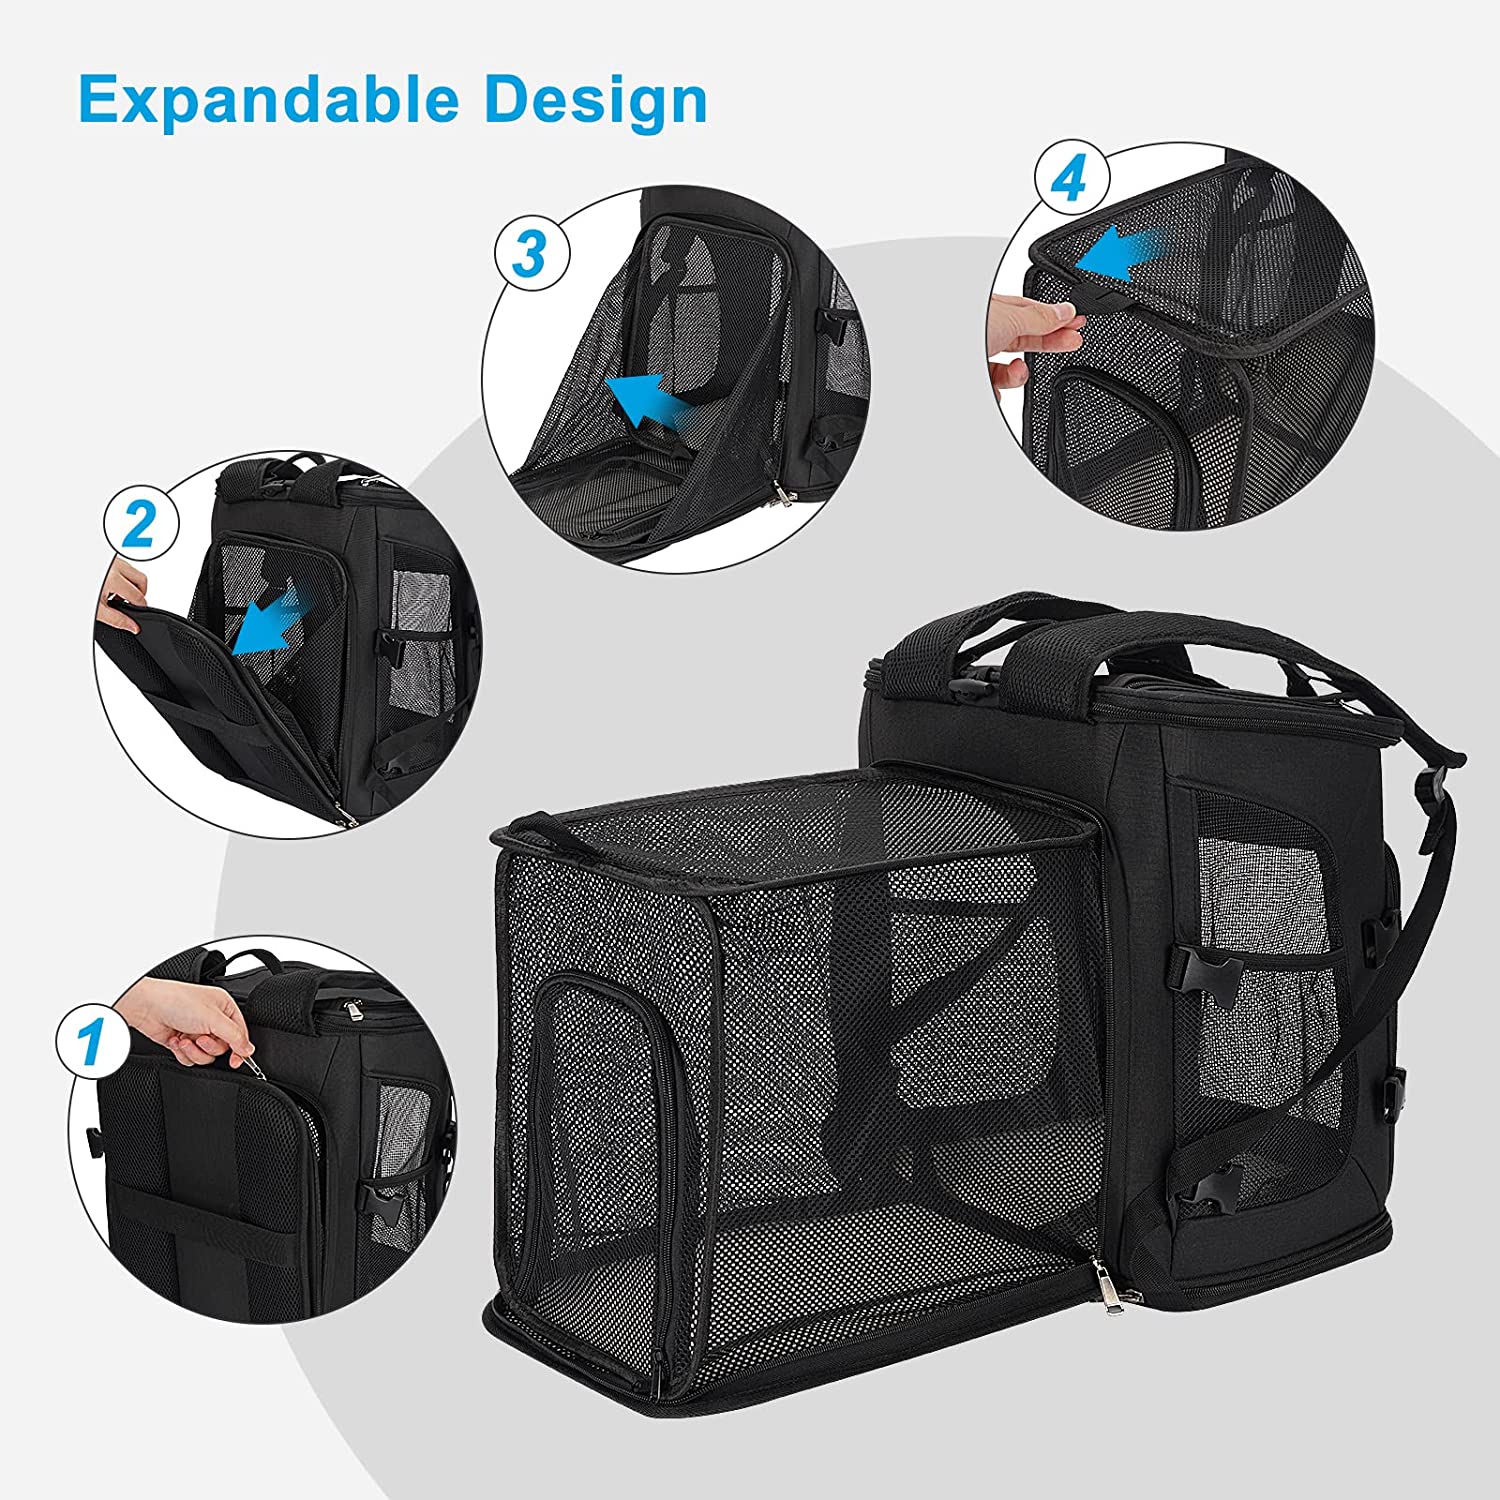 Pet Carrier Backpack with Detachable Side Pockets for Cats and Dogs， Expandable Cat Dog Puppy Carrier Backpacks， Airline Approved， for Travel / Hiking / Outdoor Use， Black